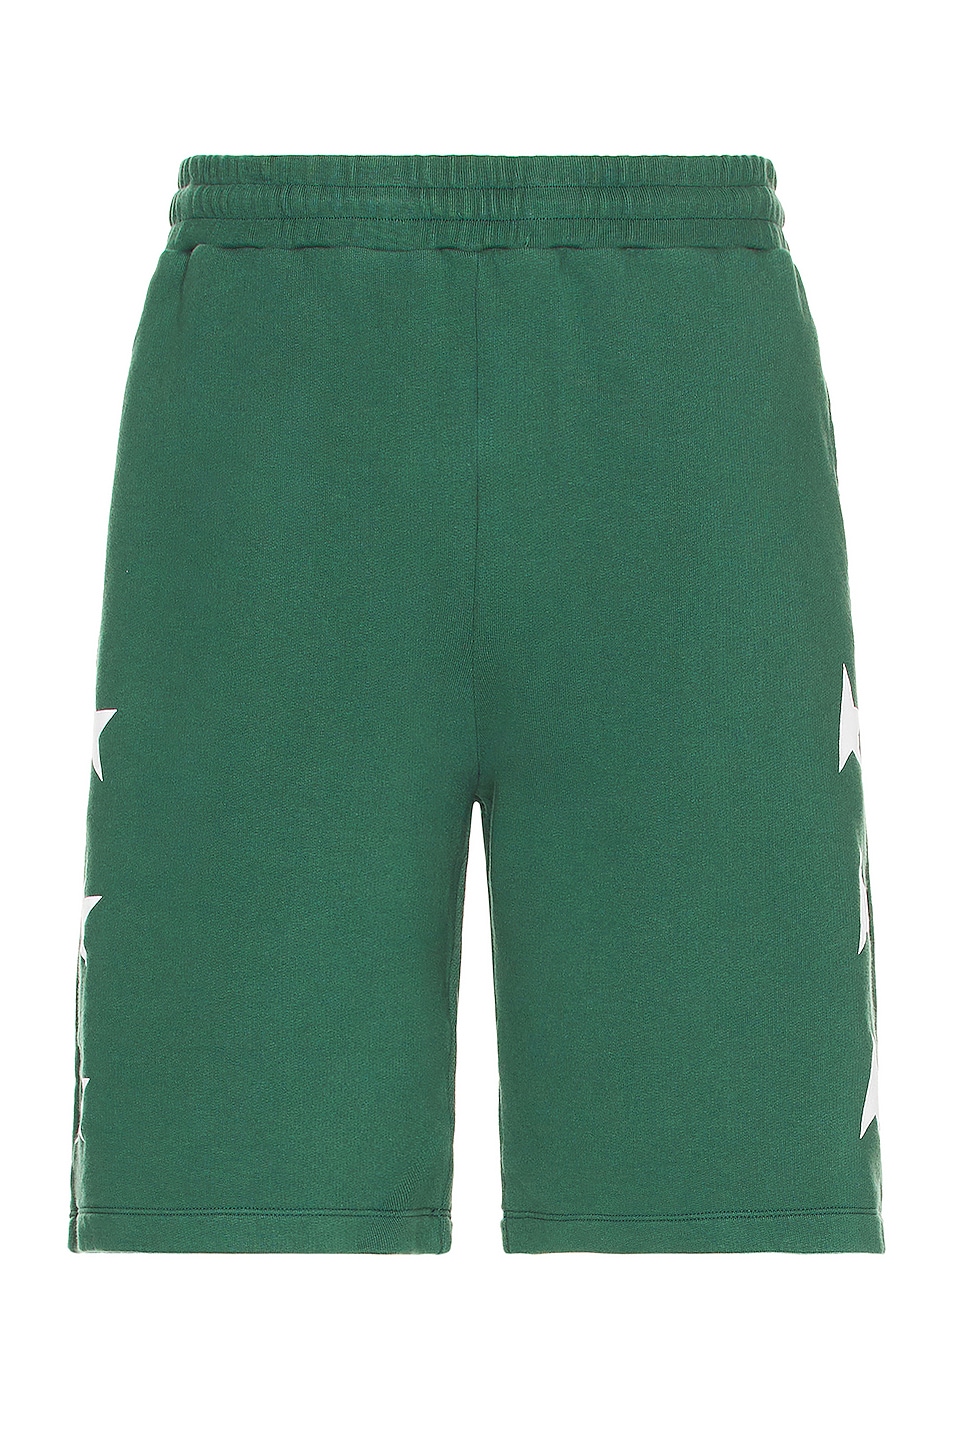 Image 1 of Golden Goose Diego Shorts in Bright Green & White